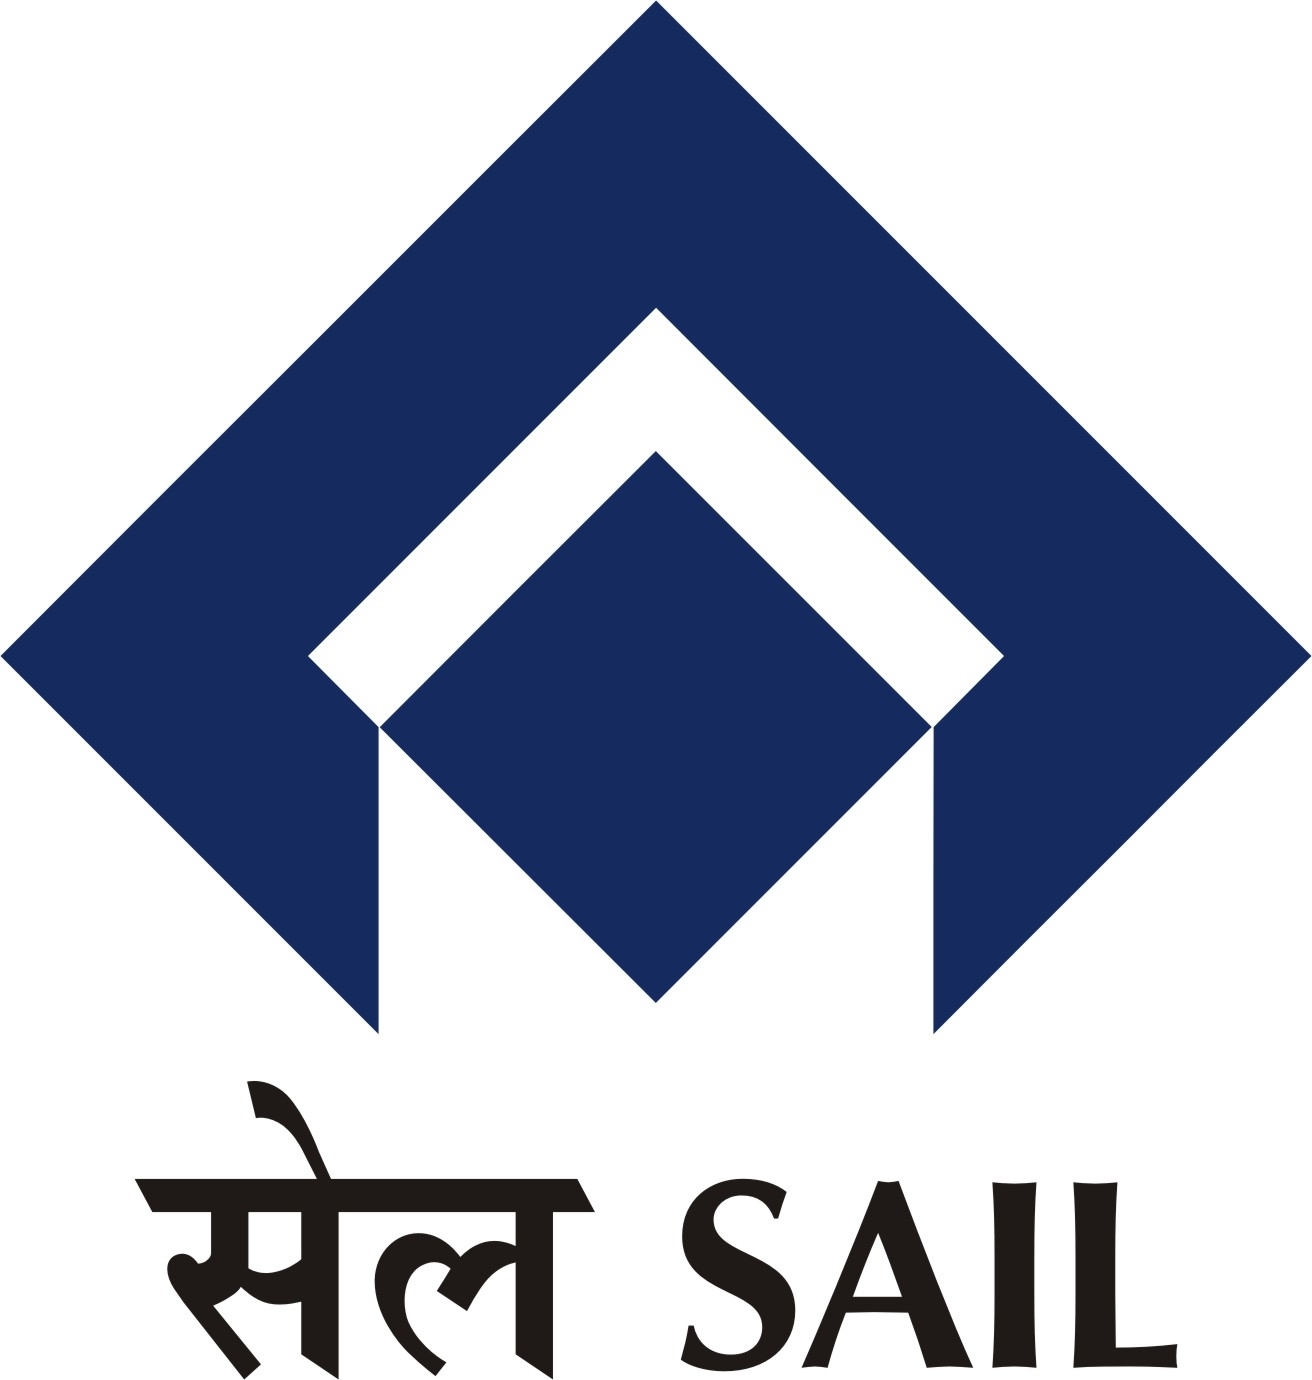 SAIL advised to widen its international presence